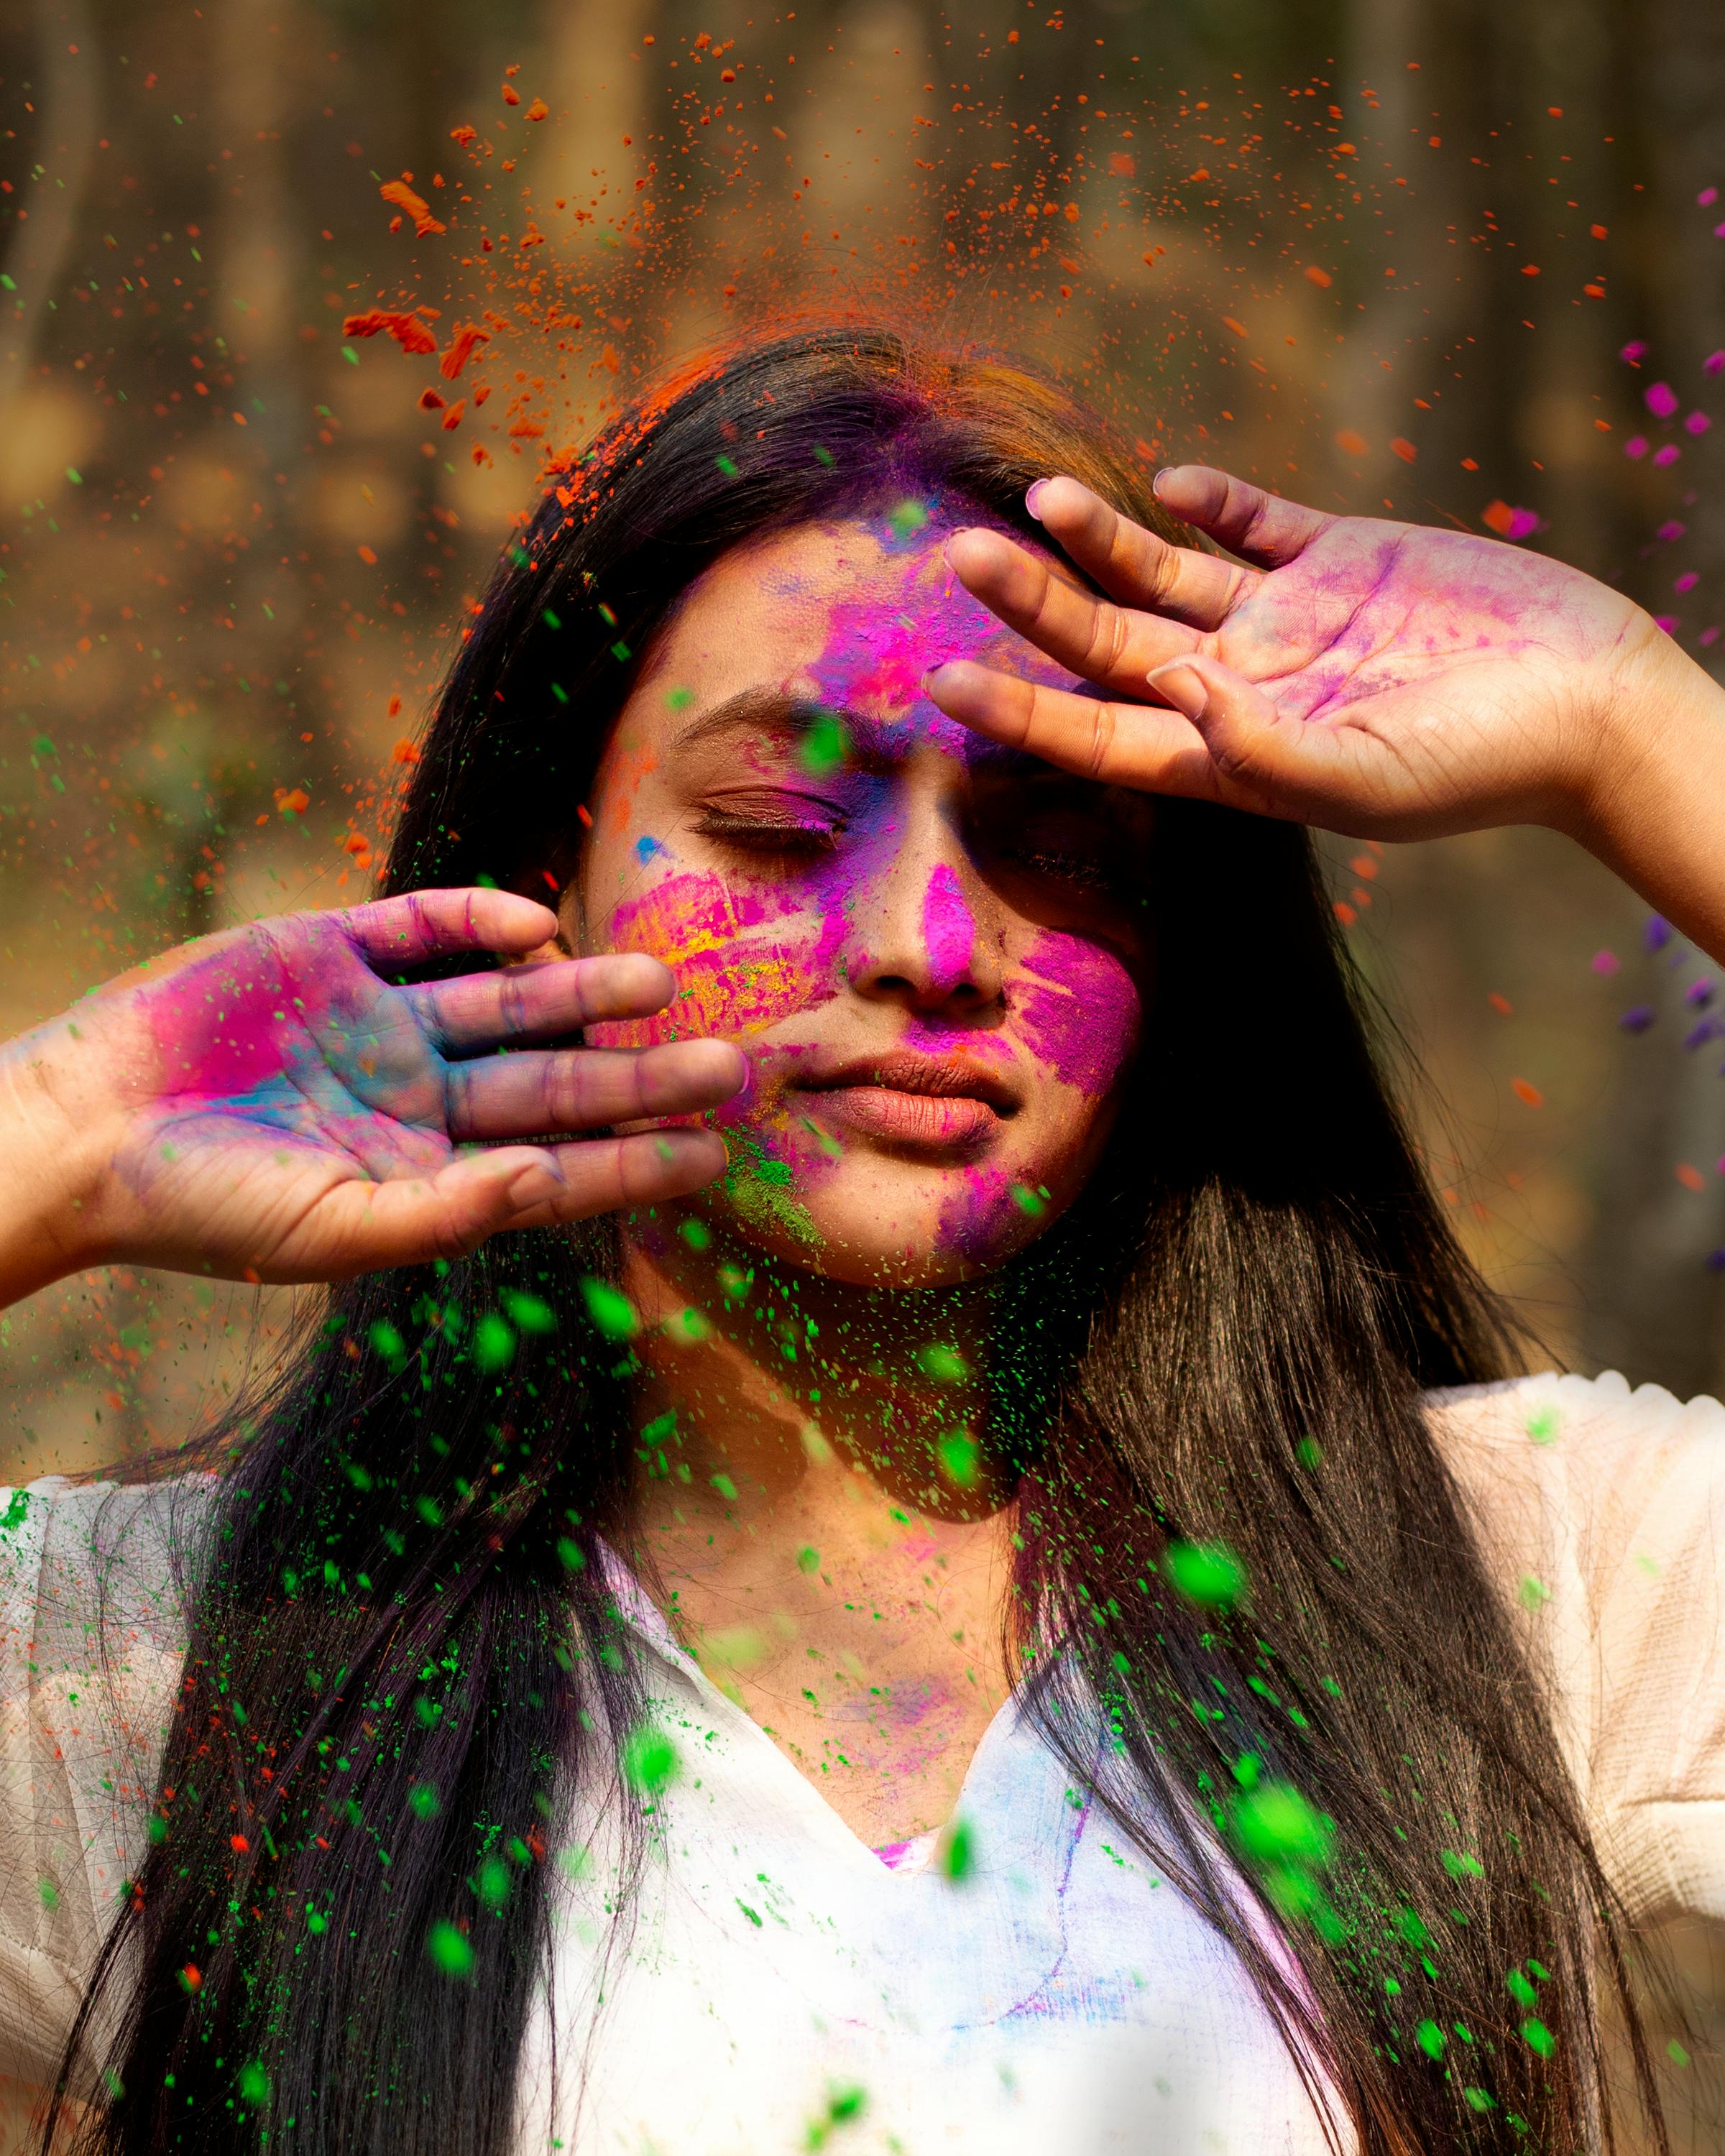 Woman Splashing Hair With Holi Powder High-Res Stock Photo - Getty Images